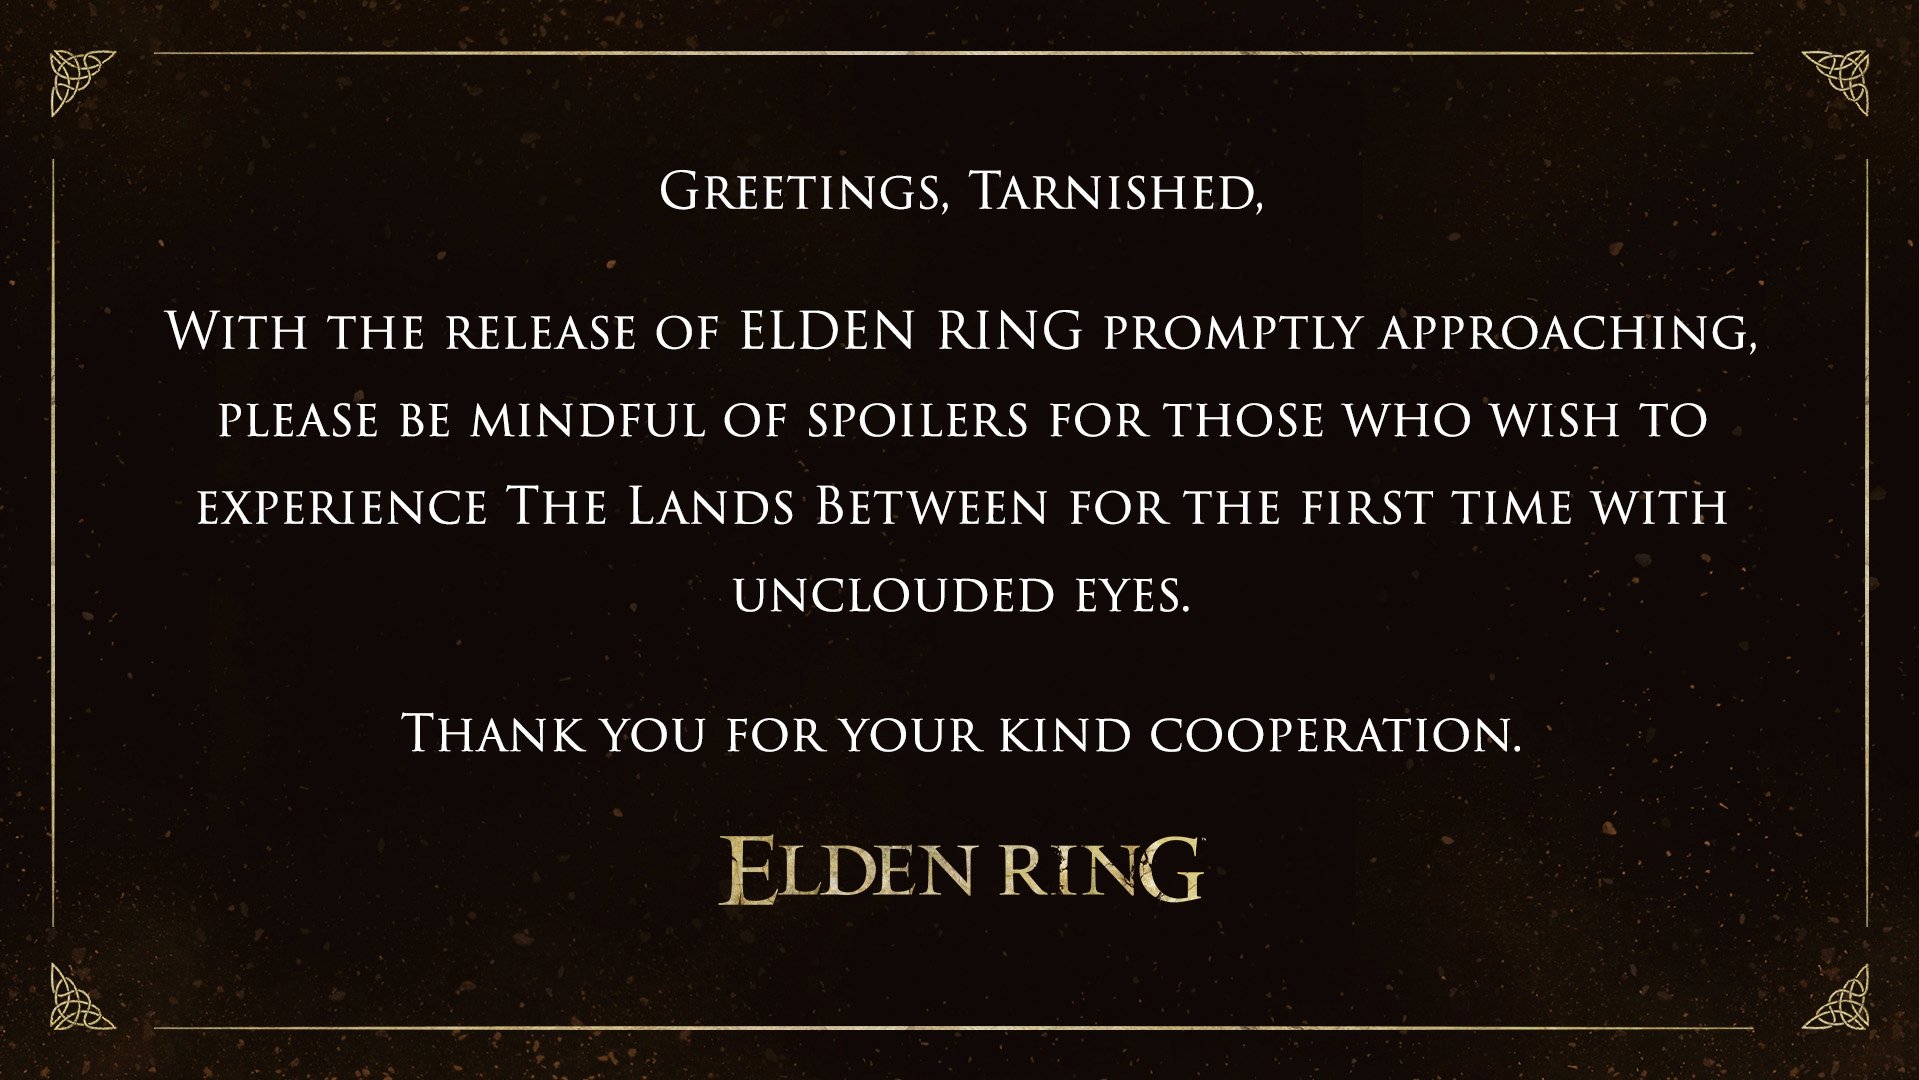 From Software warns Elden Ring players about posting spoilers.